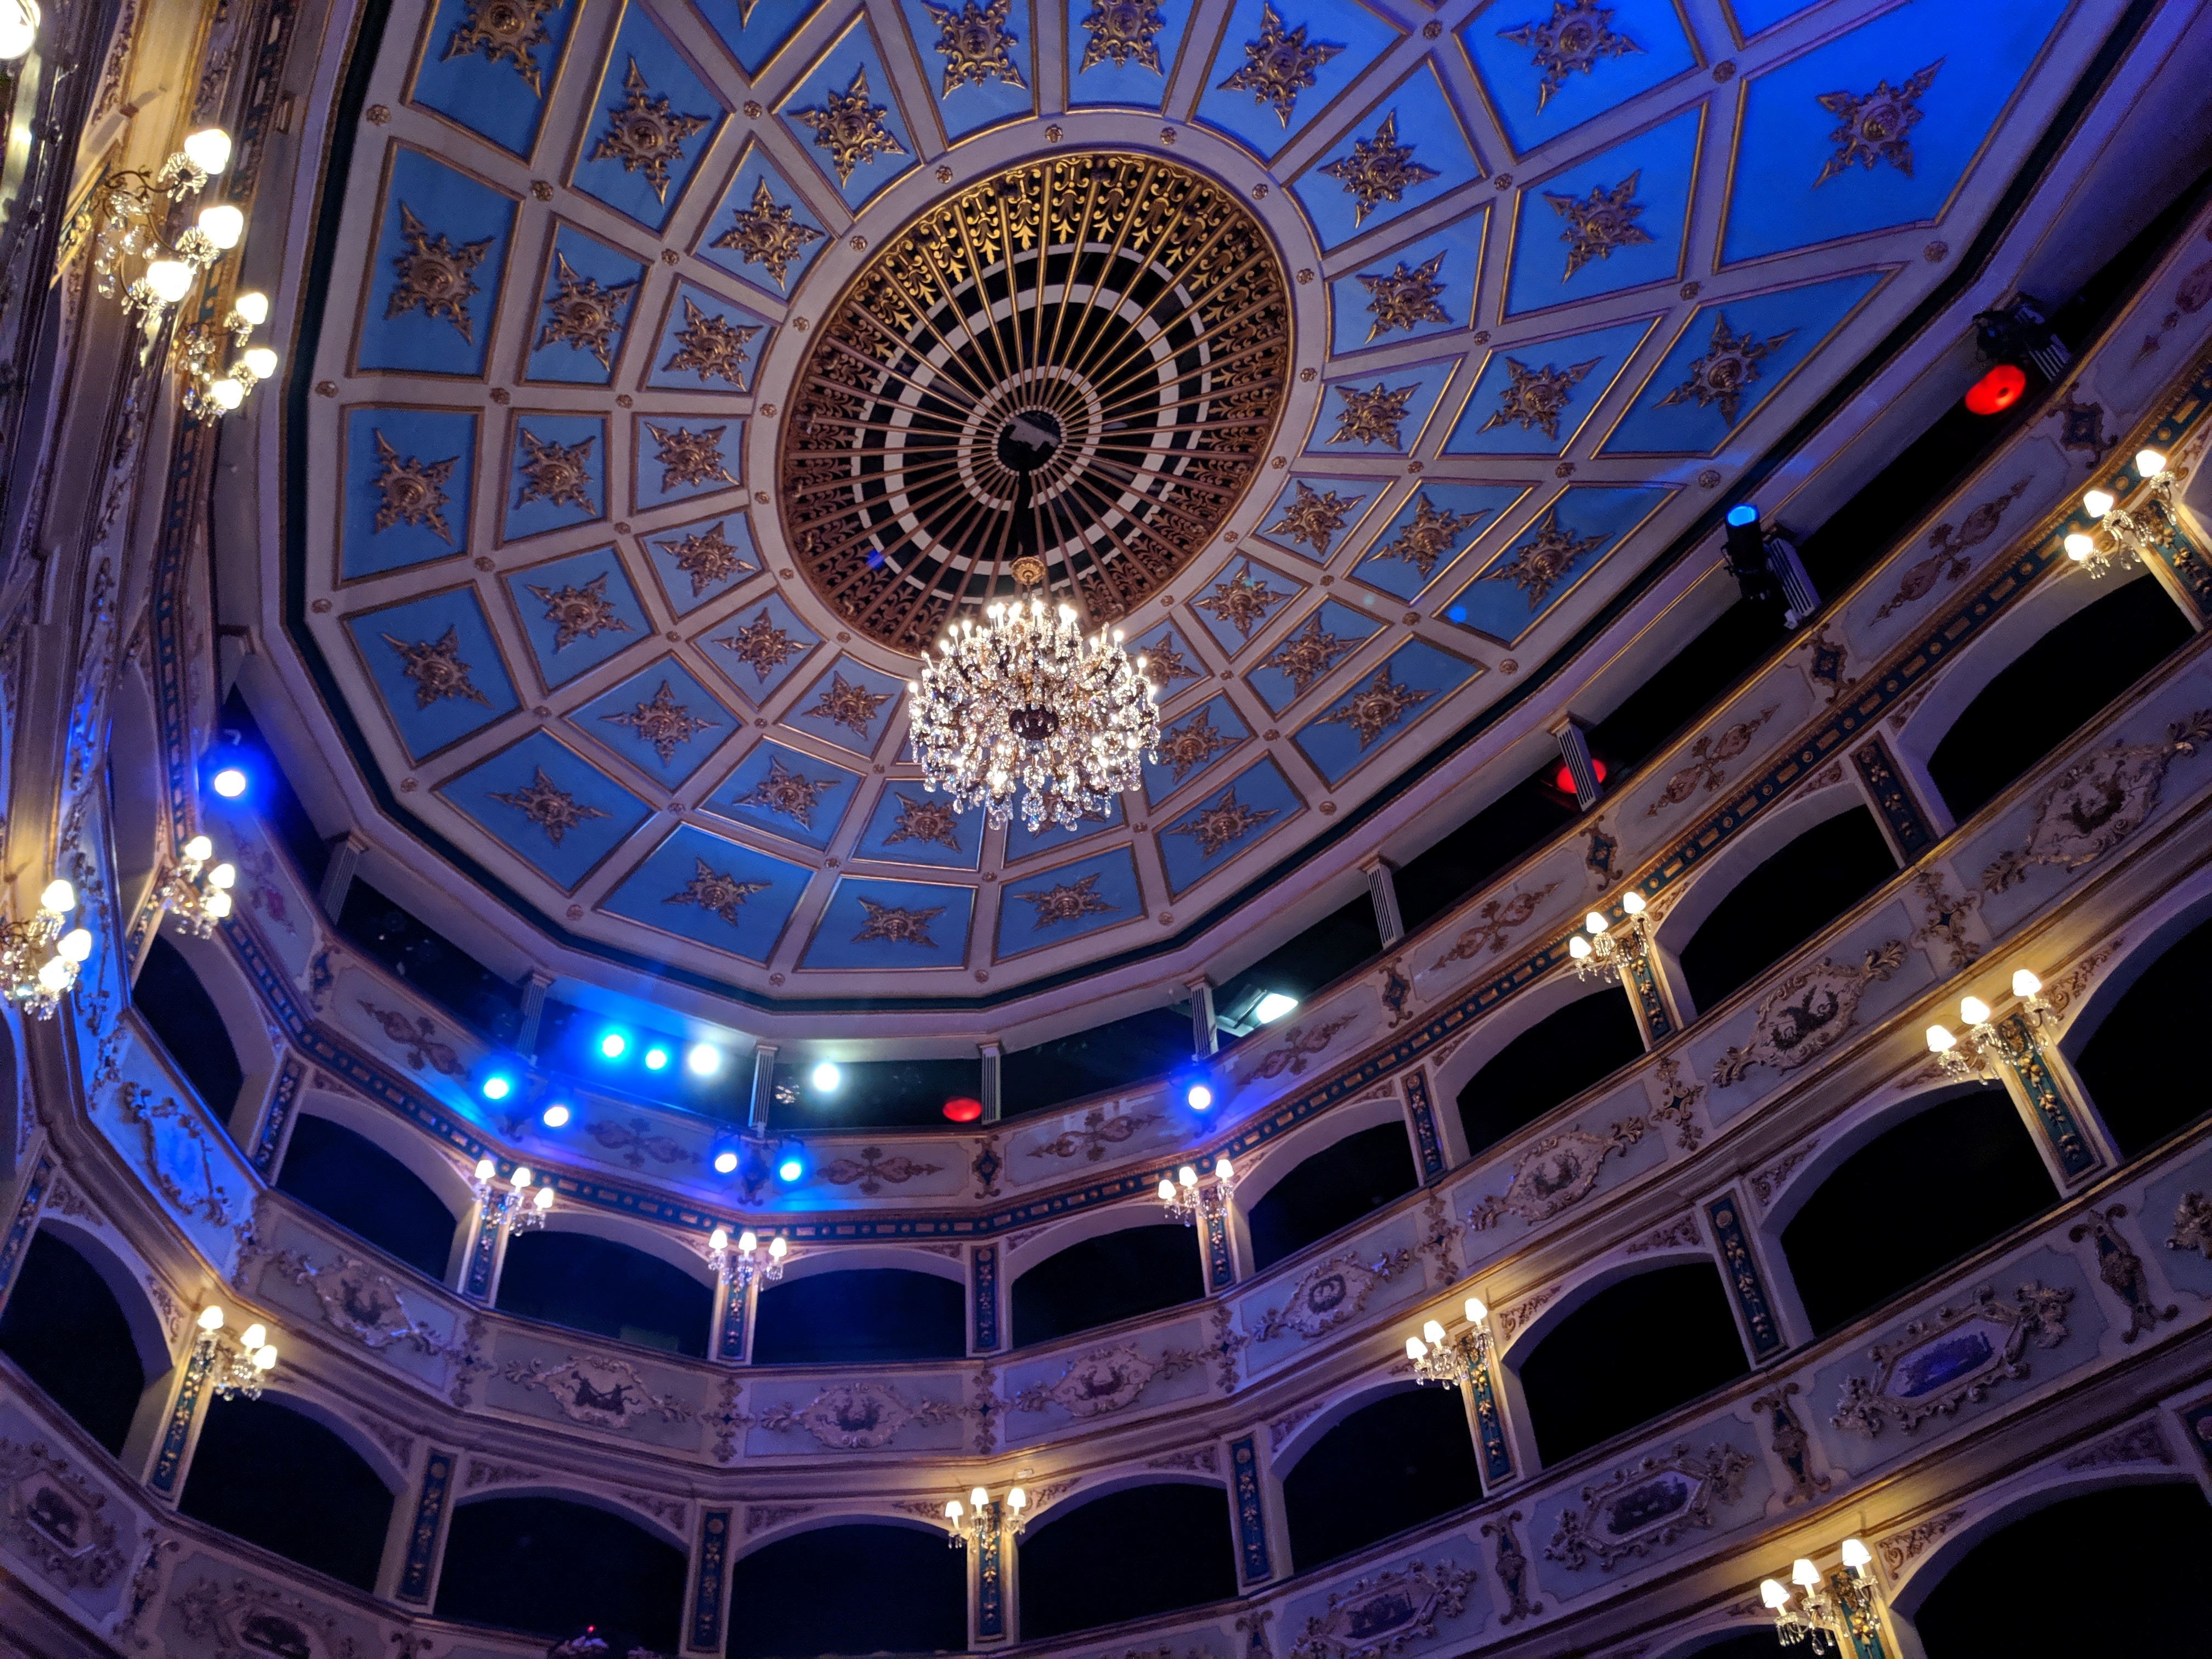 Learn-English-and-Culture-The-Manoel-Theatre-in-Valletta-Malta-during-Notte-Bianca-in-October.jpg